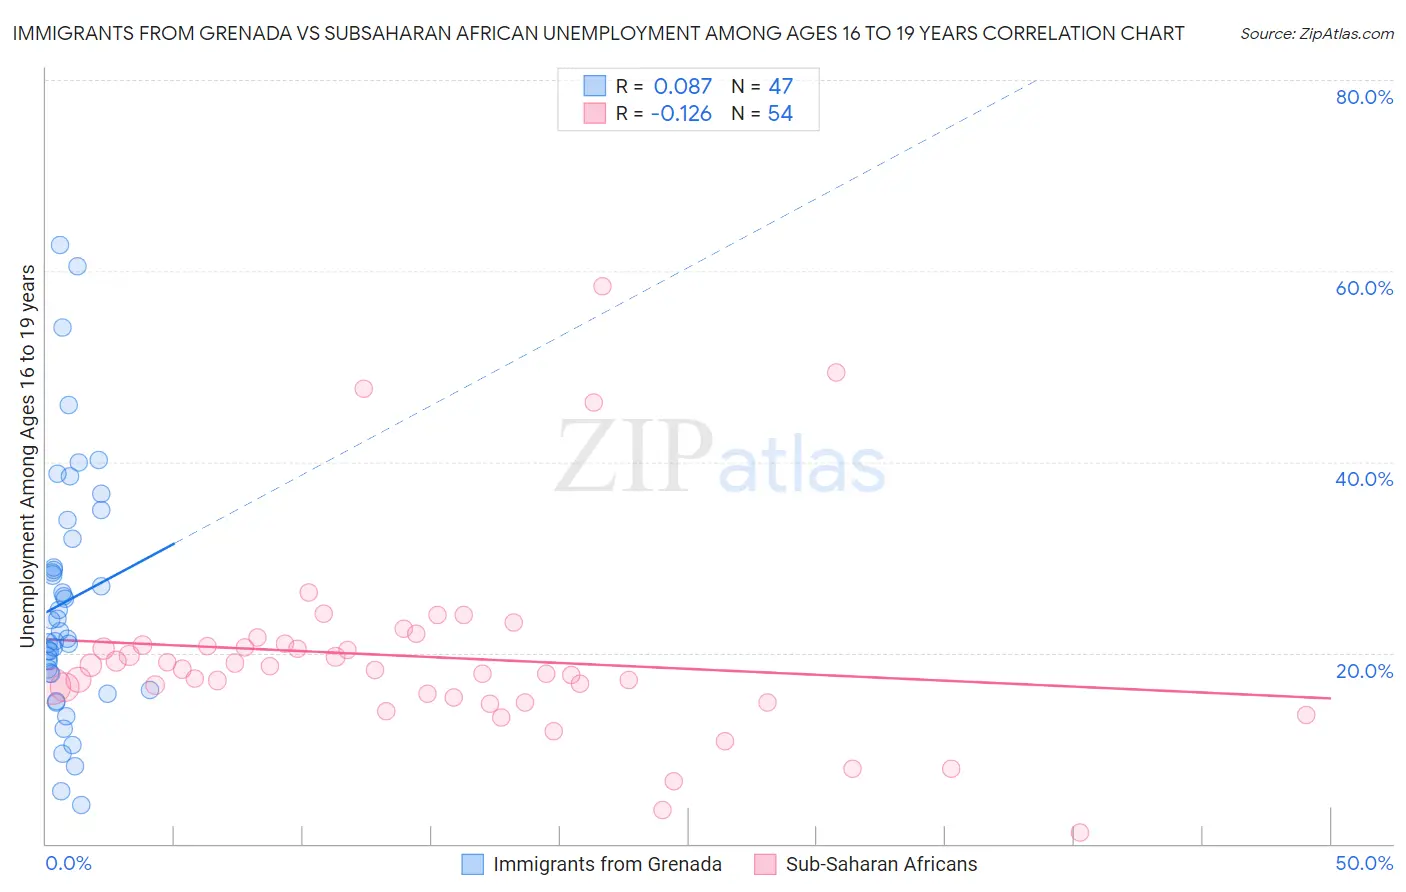 Immigrants from Grenada vs Subsaharan African Unemployment Among Ages 16 to 19 years